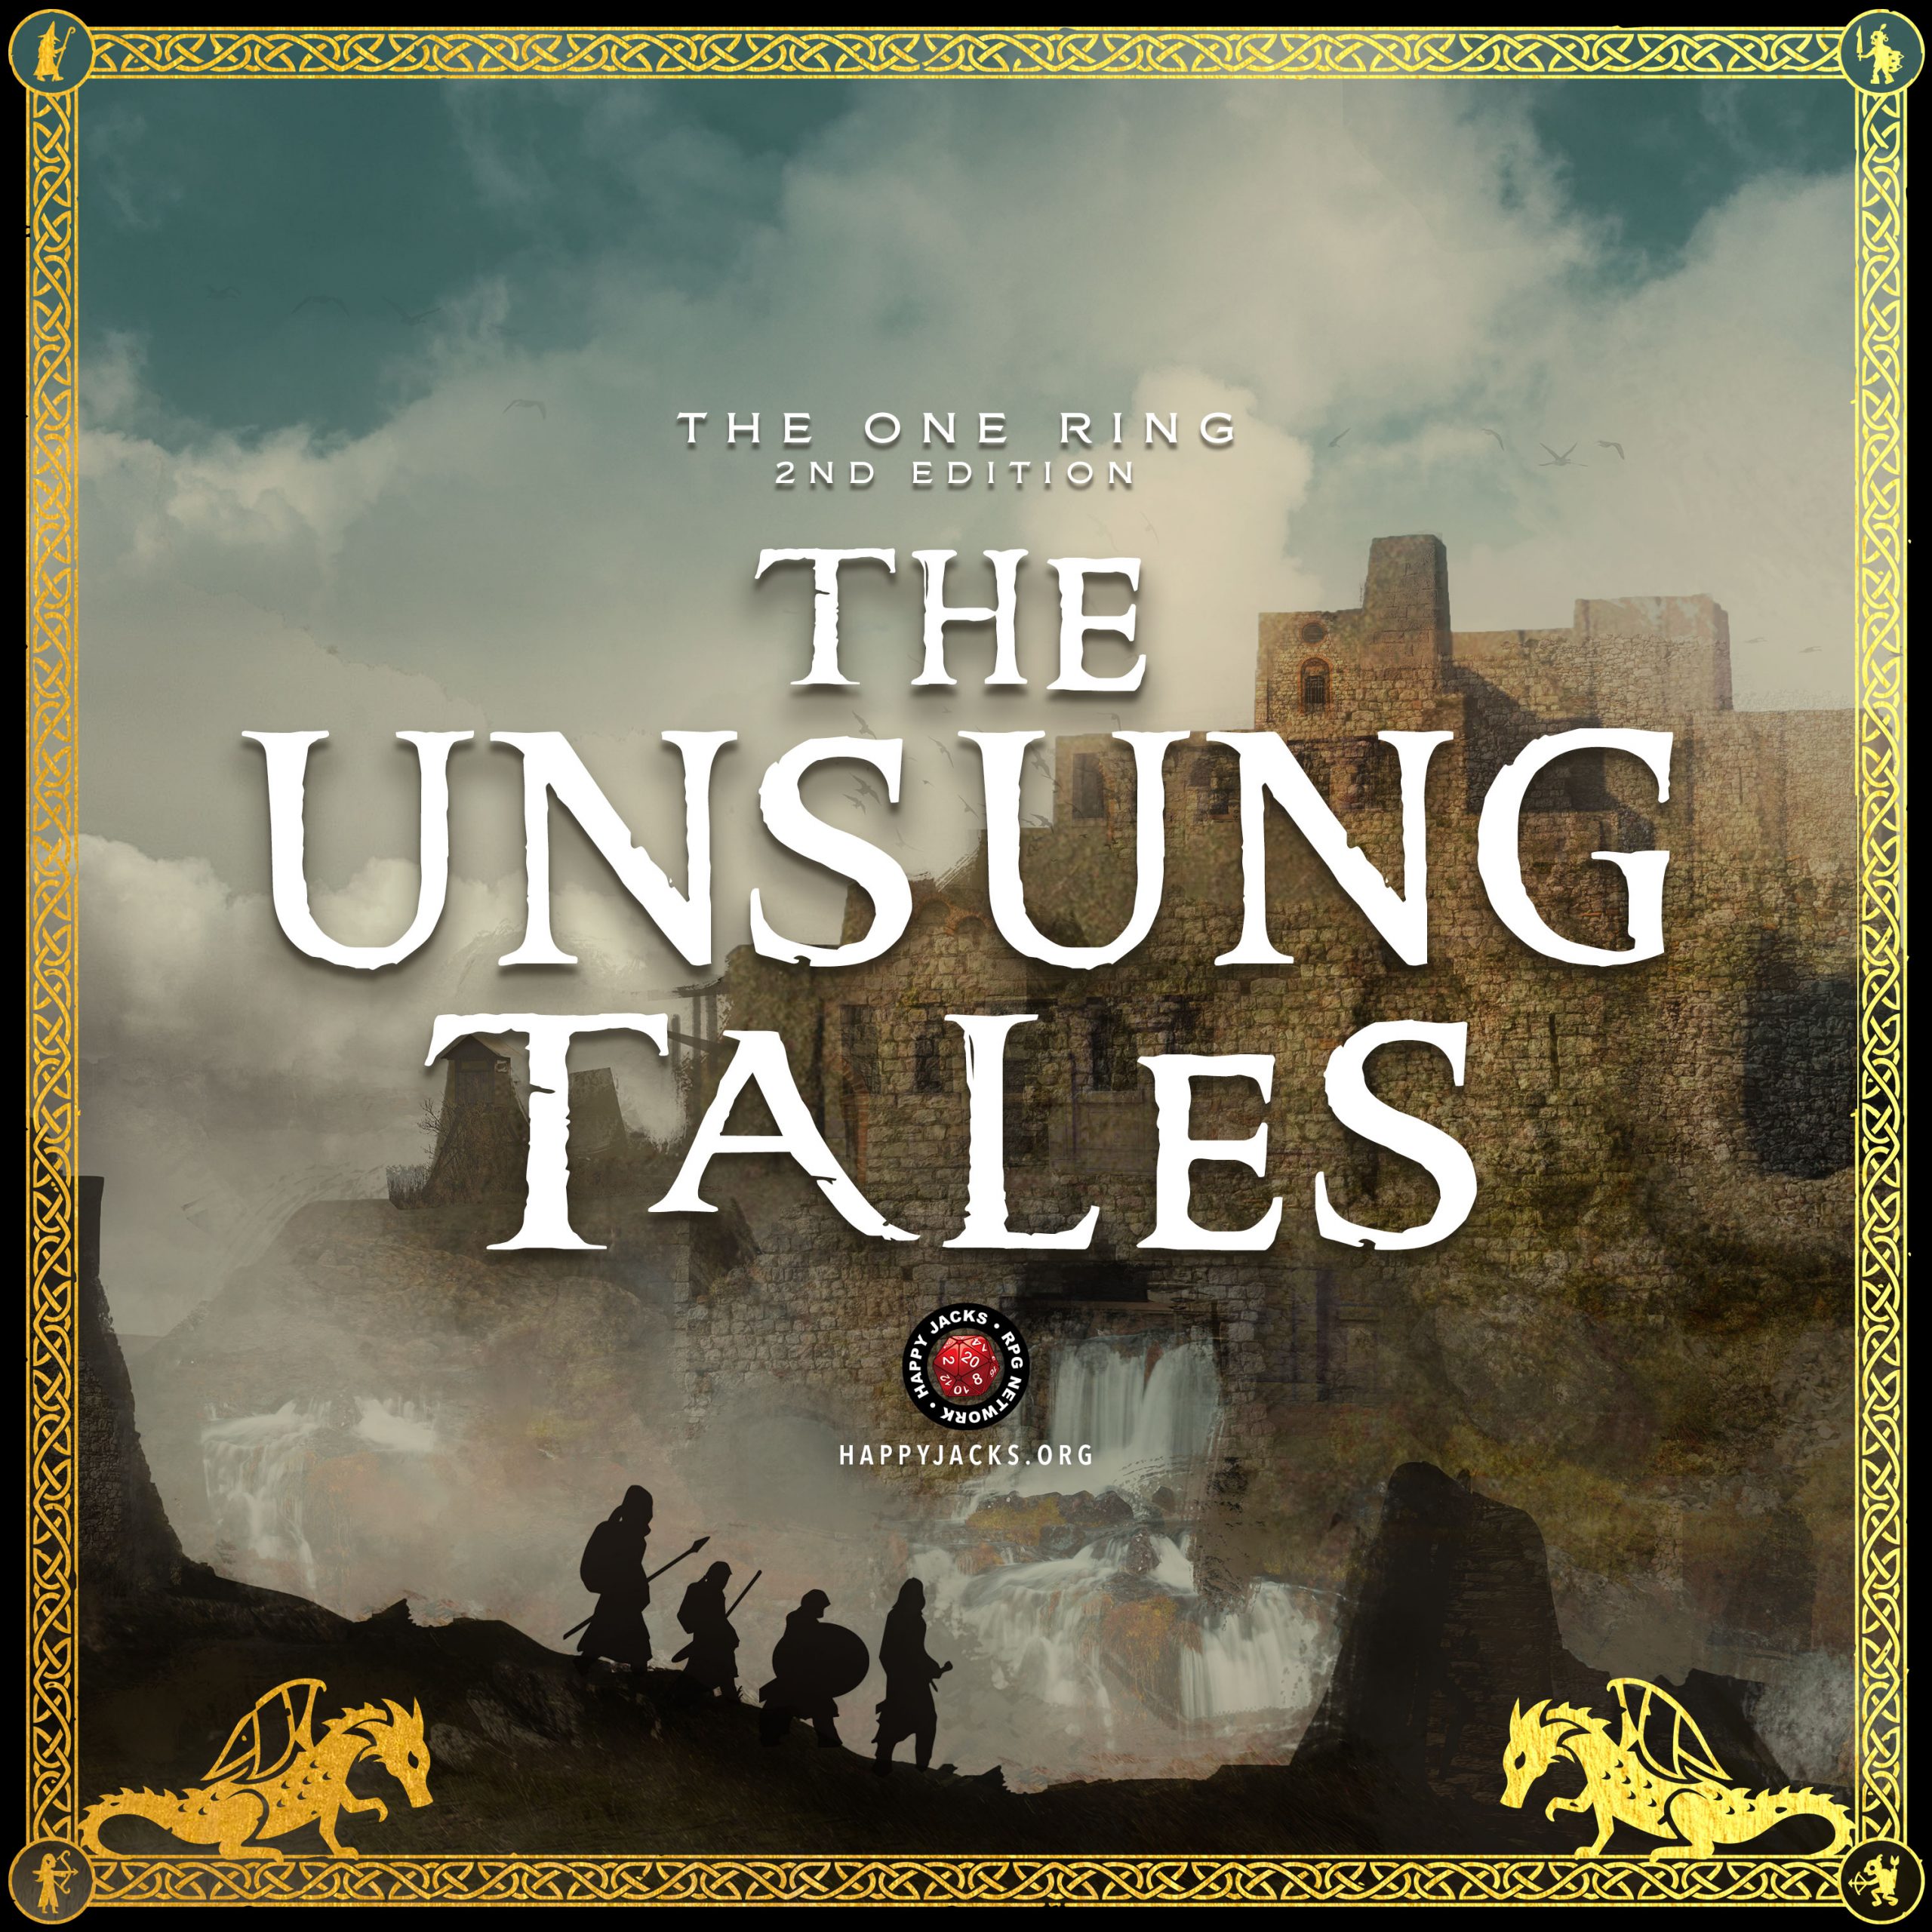 UNSUNG14 Rivendell | The Unsung Tales | The One Ring 2e